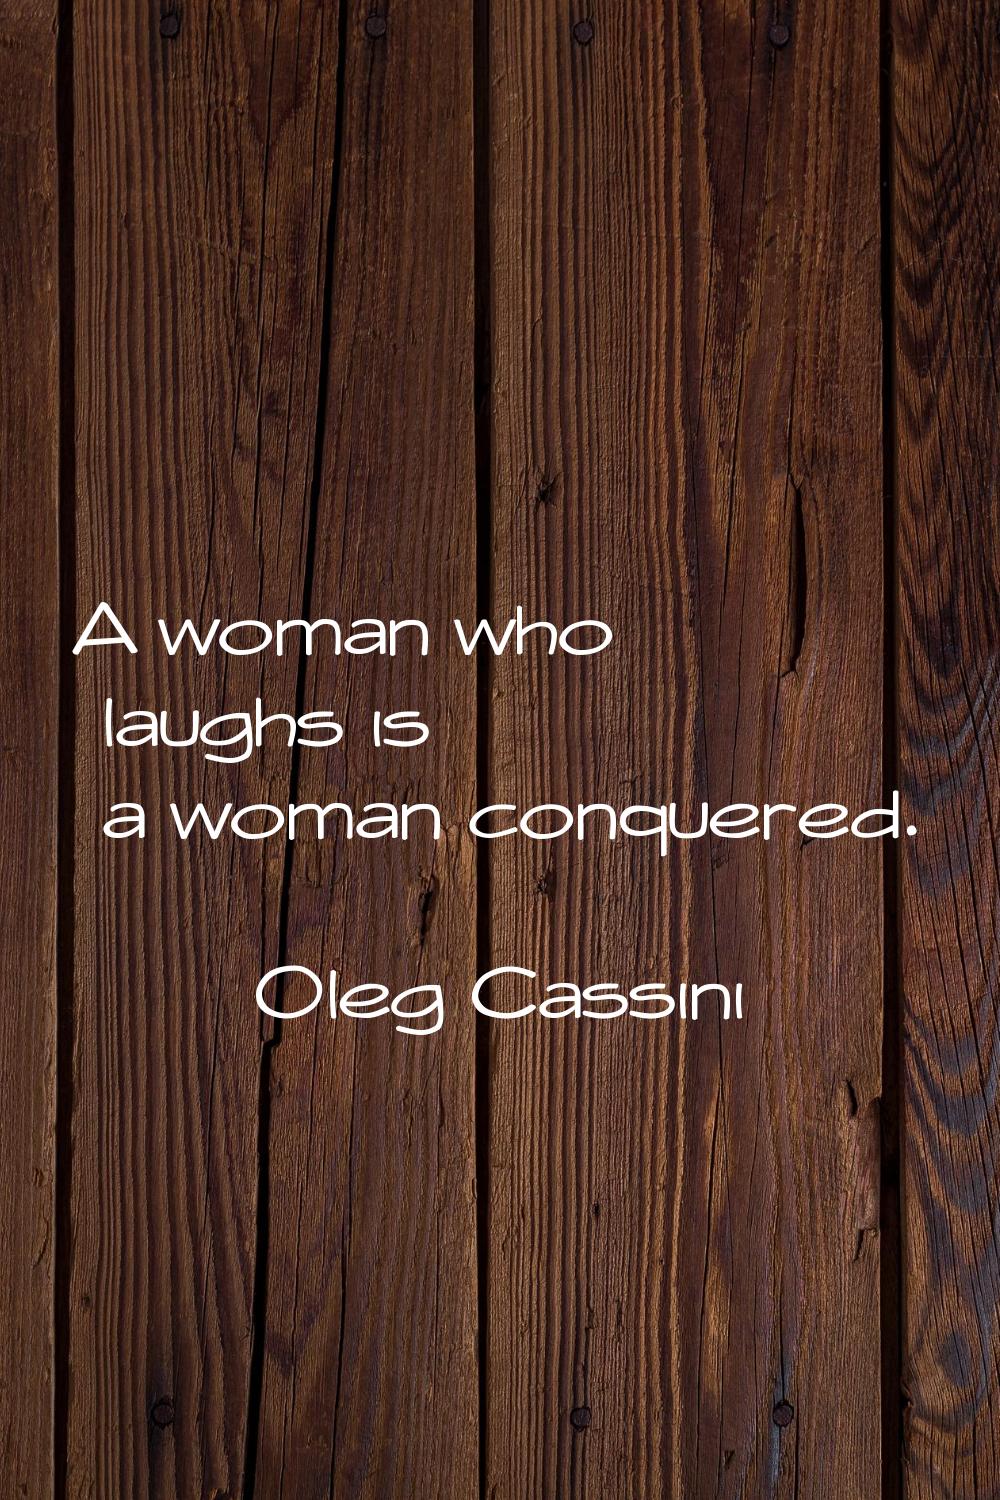 A woman who laughs is a woman conquered.